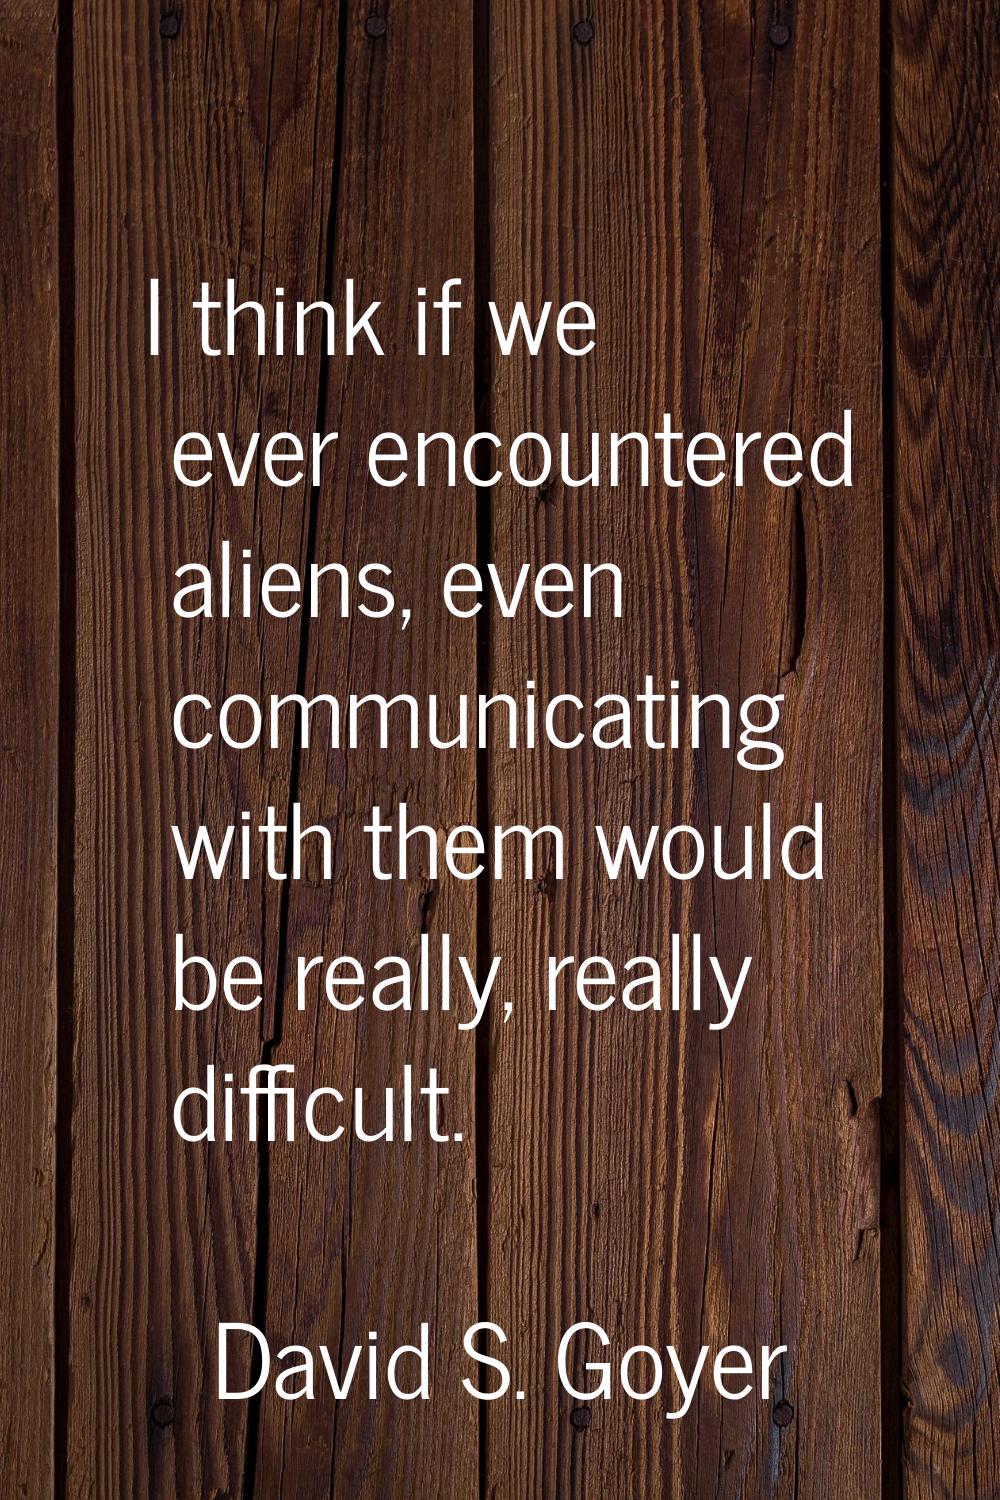 I think if we ever encountered aliens, even communicating with them would be really, really difficu